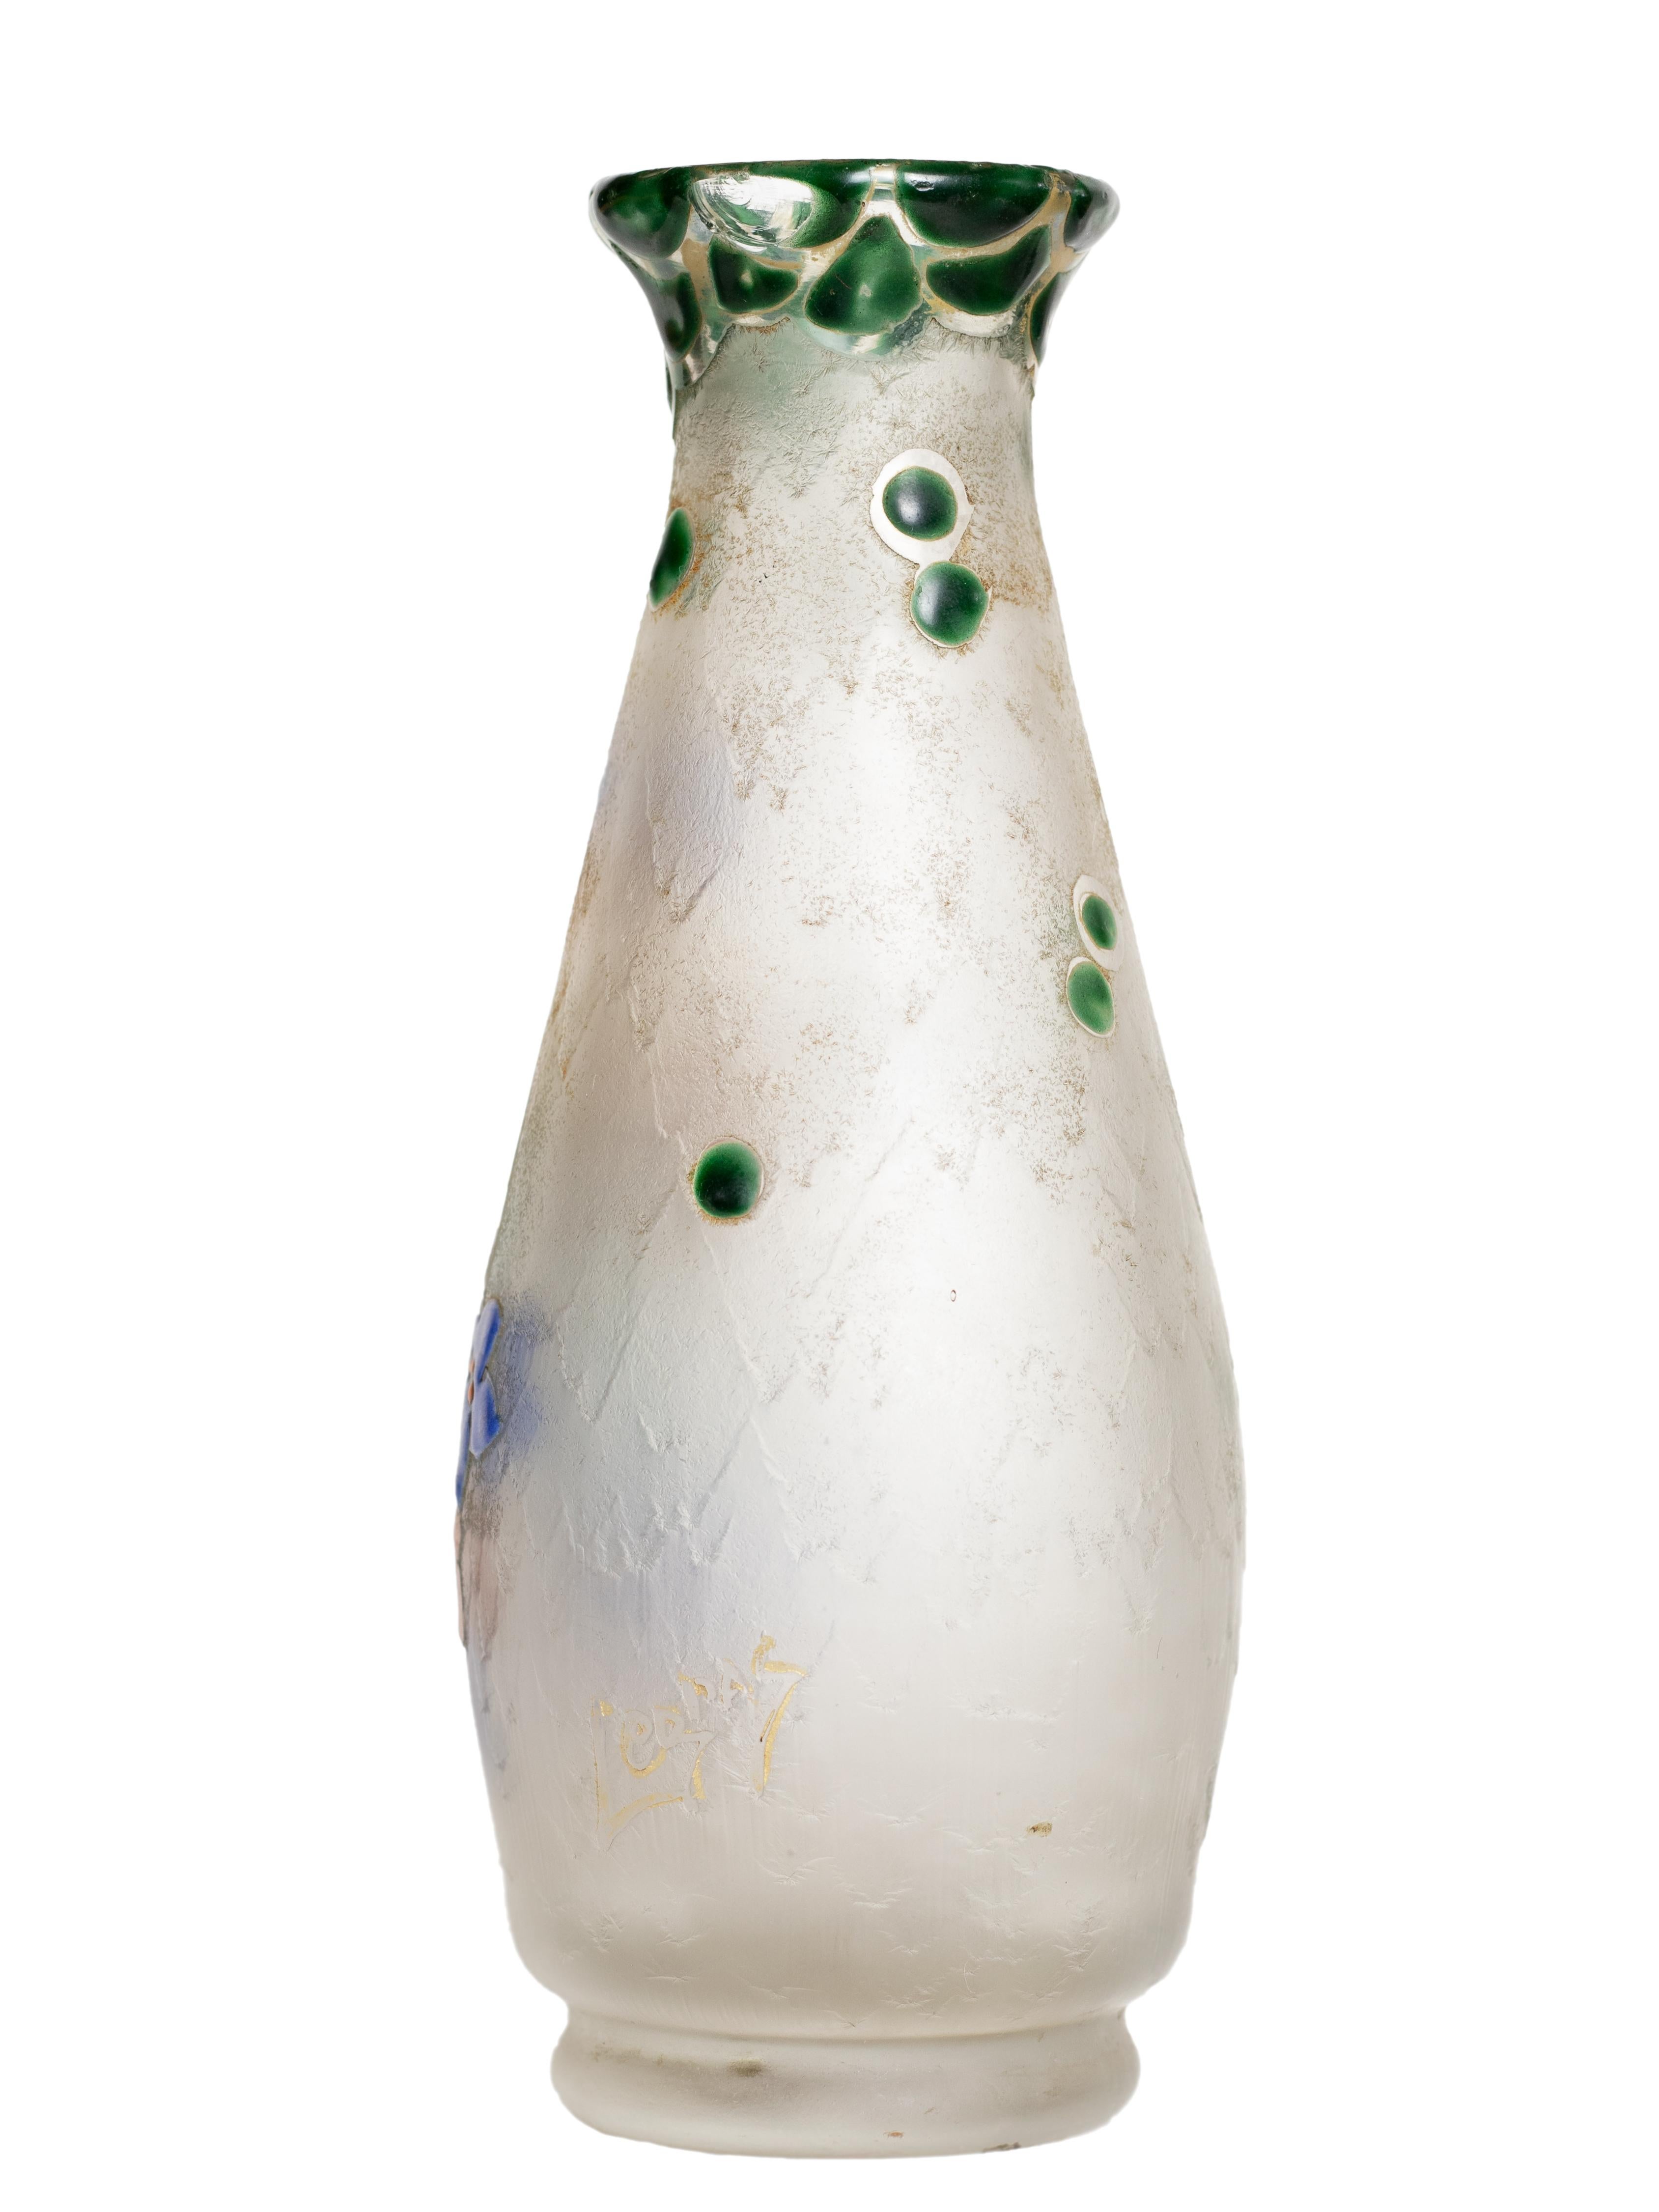  Legras Cameo Glass Vase by François-Théodore Legras, 20th Century In Good Condition For Sale In Lisbon, PT